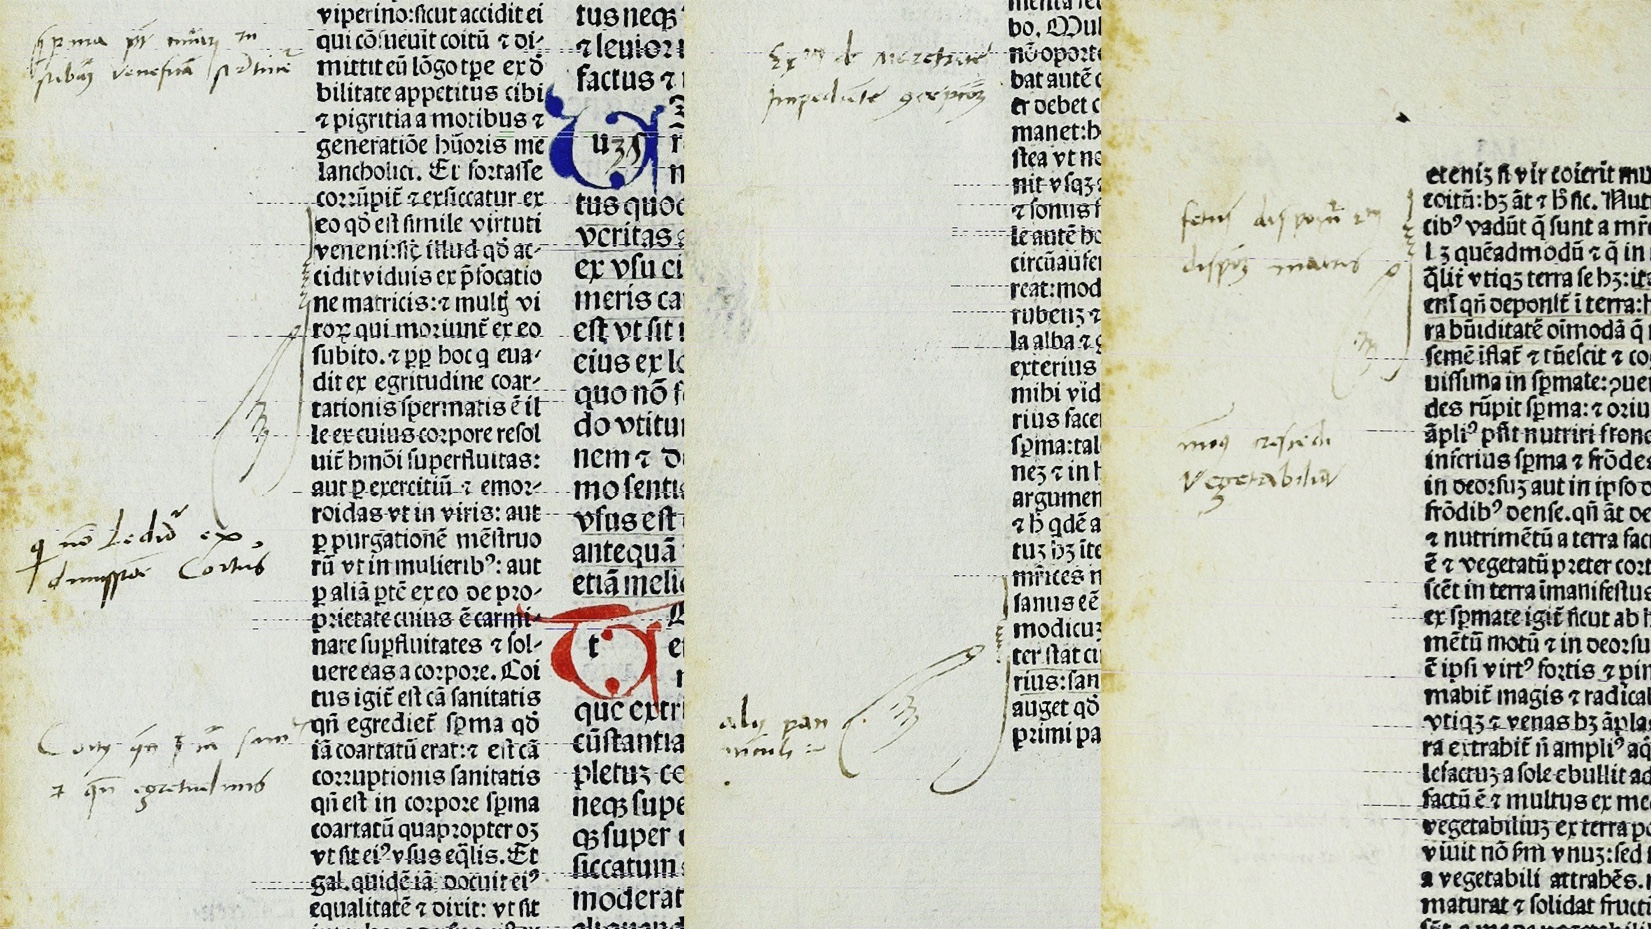 Image of a page from Artesela with historical annotations